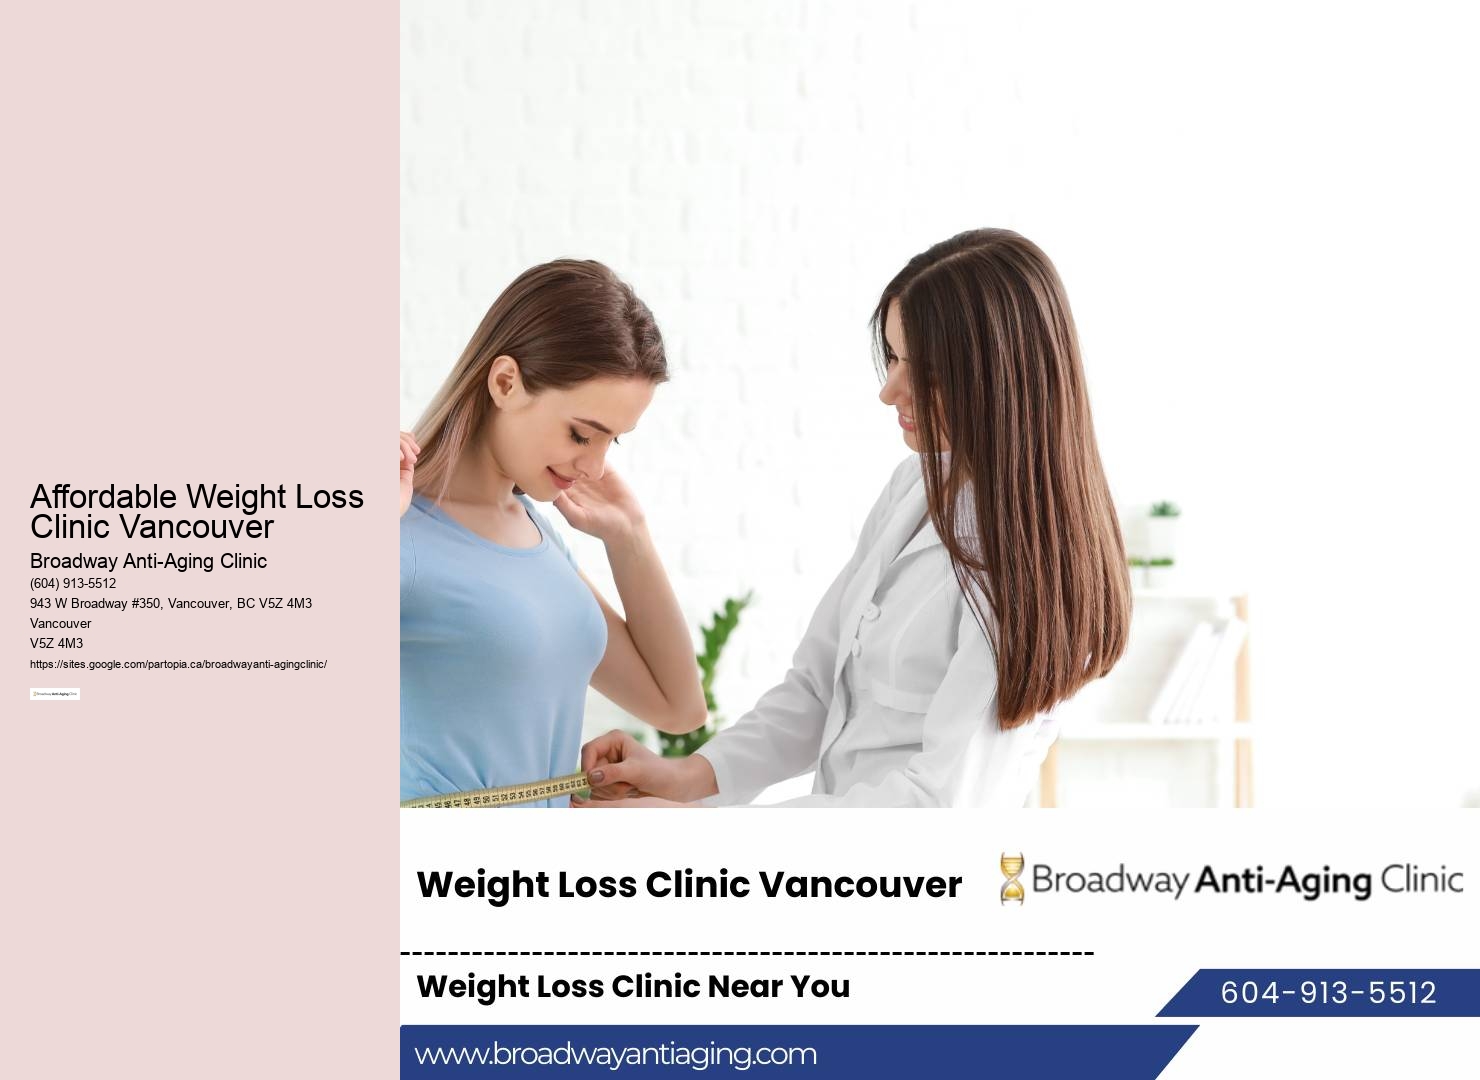 Affordable Weight Loss Clinic Vancouver